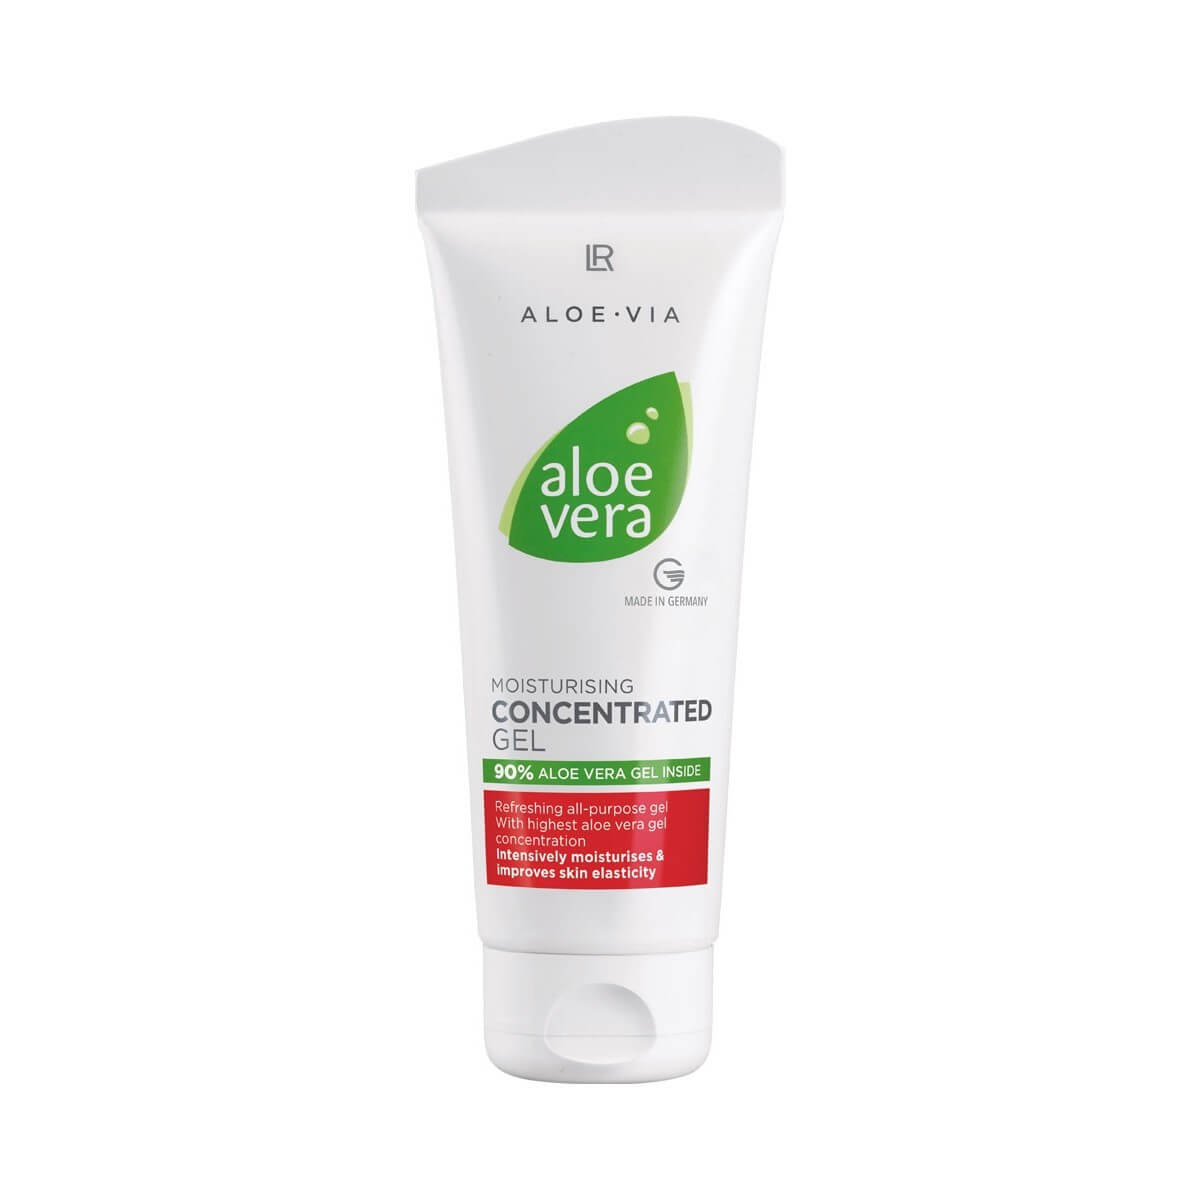 Lr Aloe Vera Moisturizing Concentrated Gel for wound, insects bites and small cuts